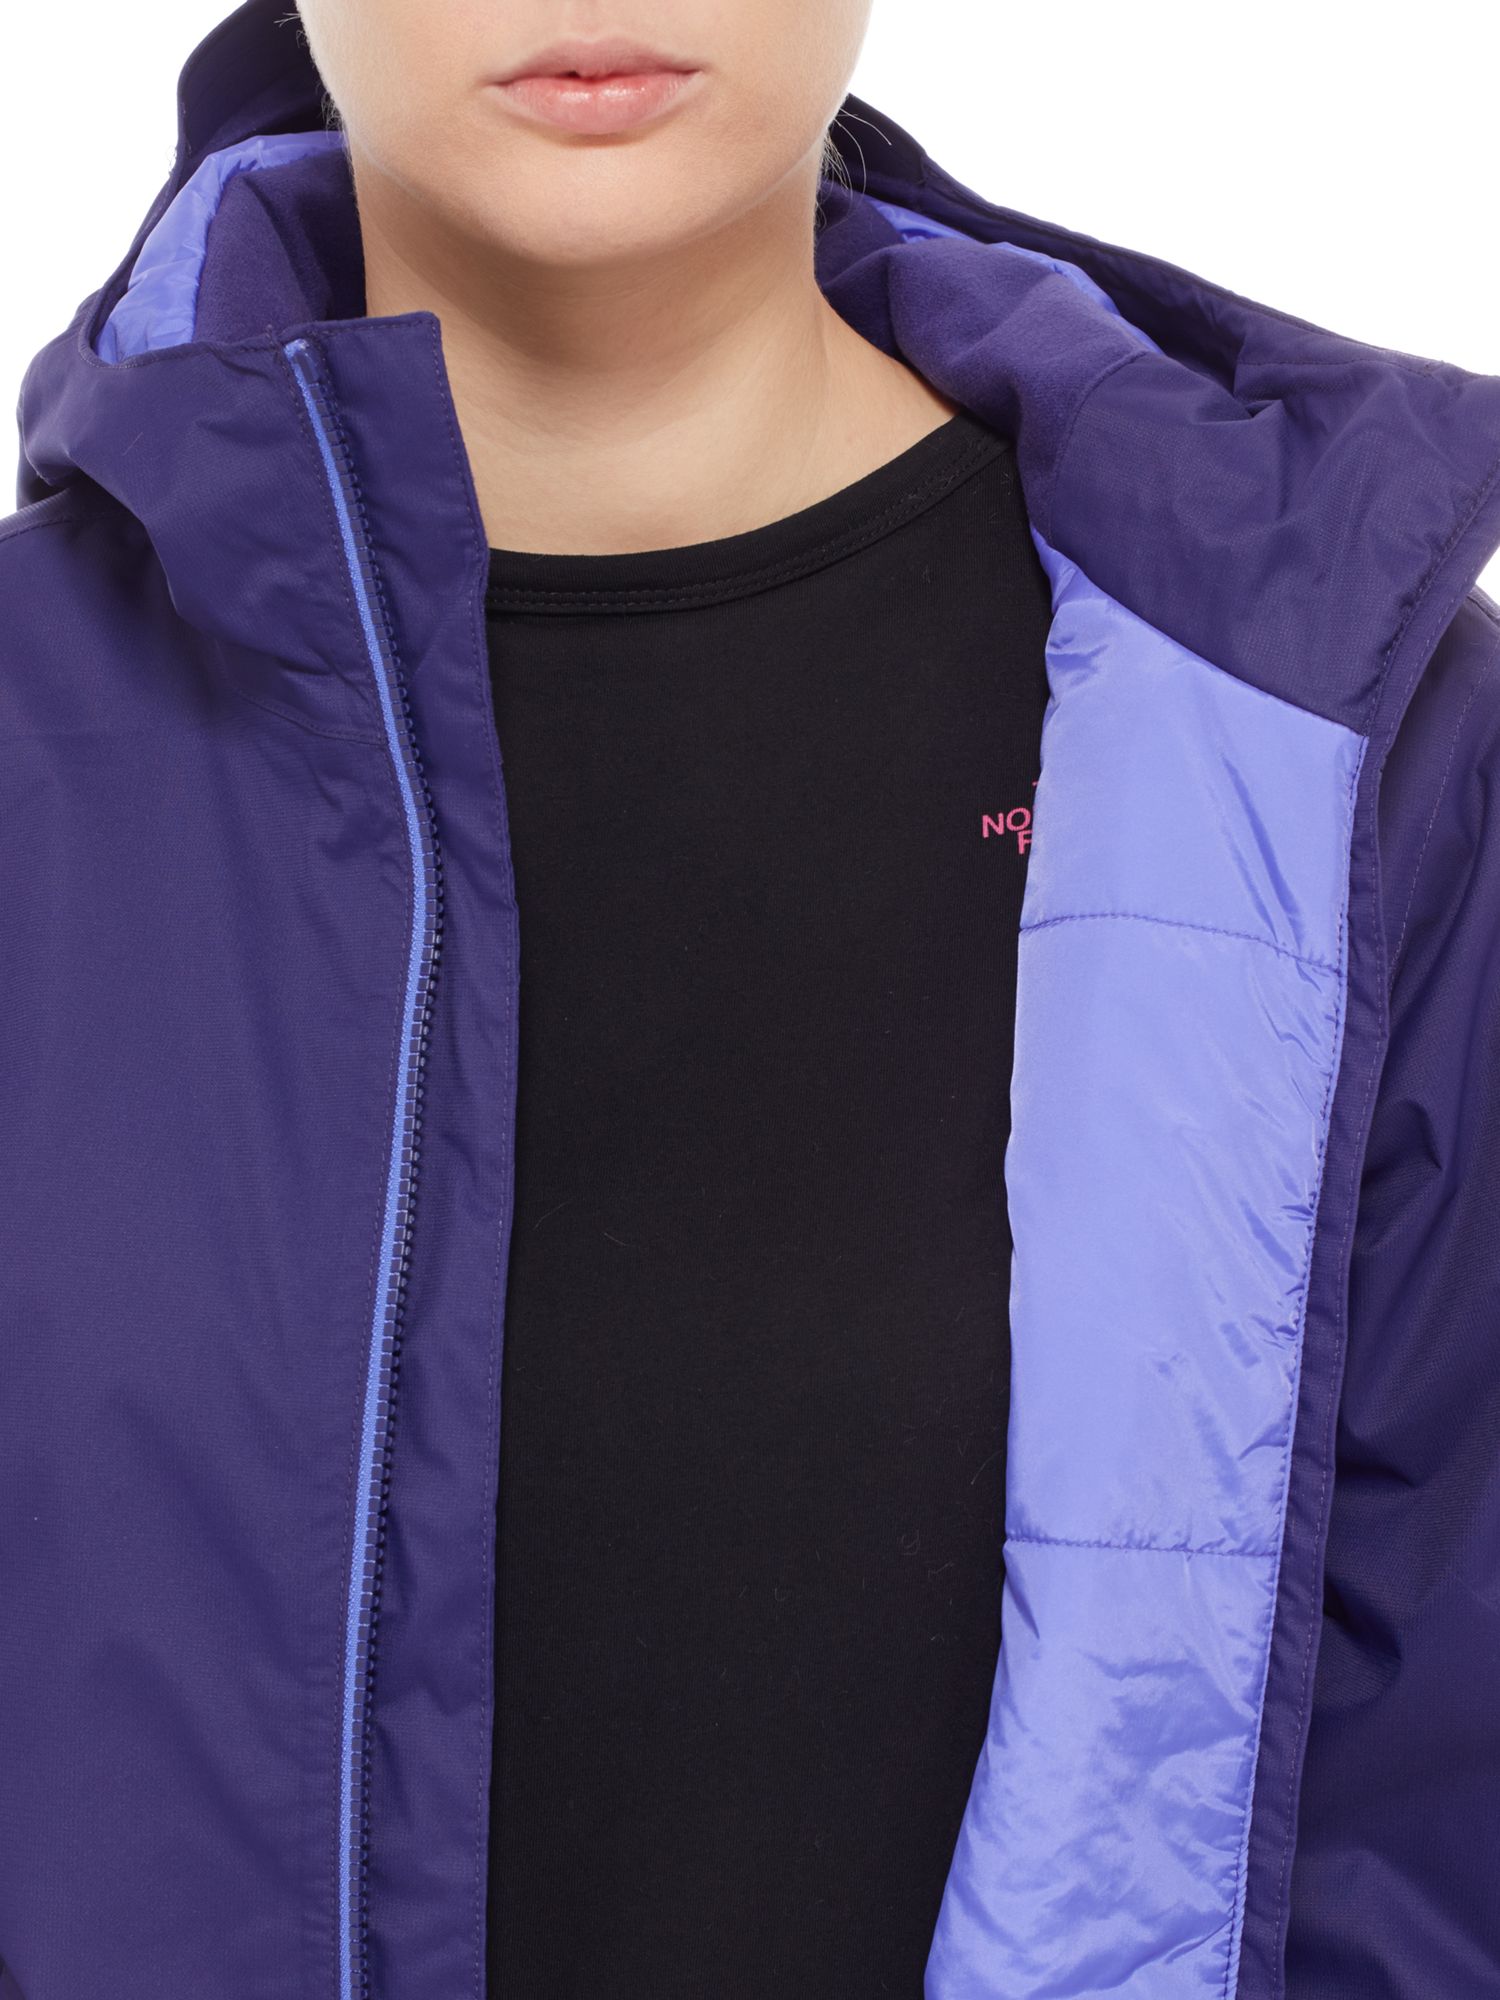 womens quest insulated jacket